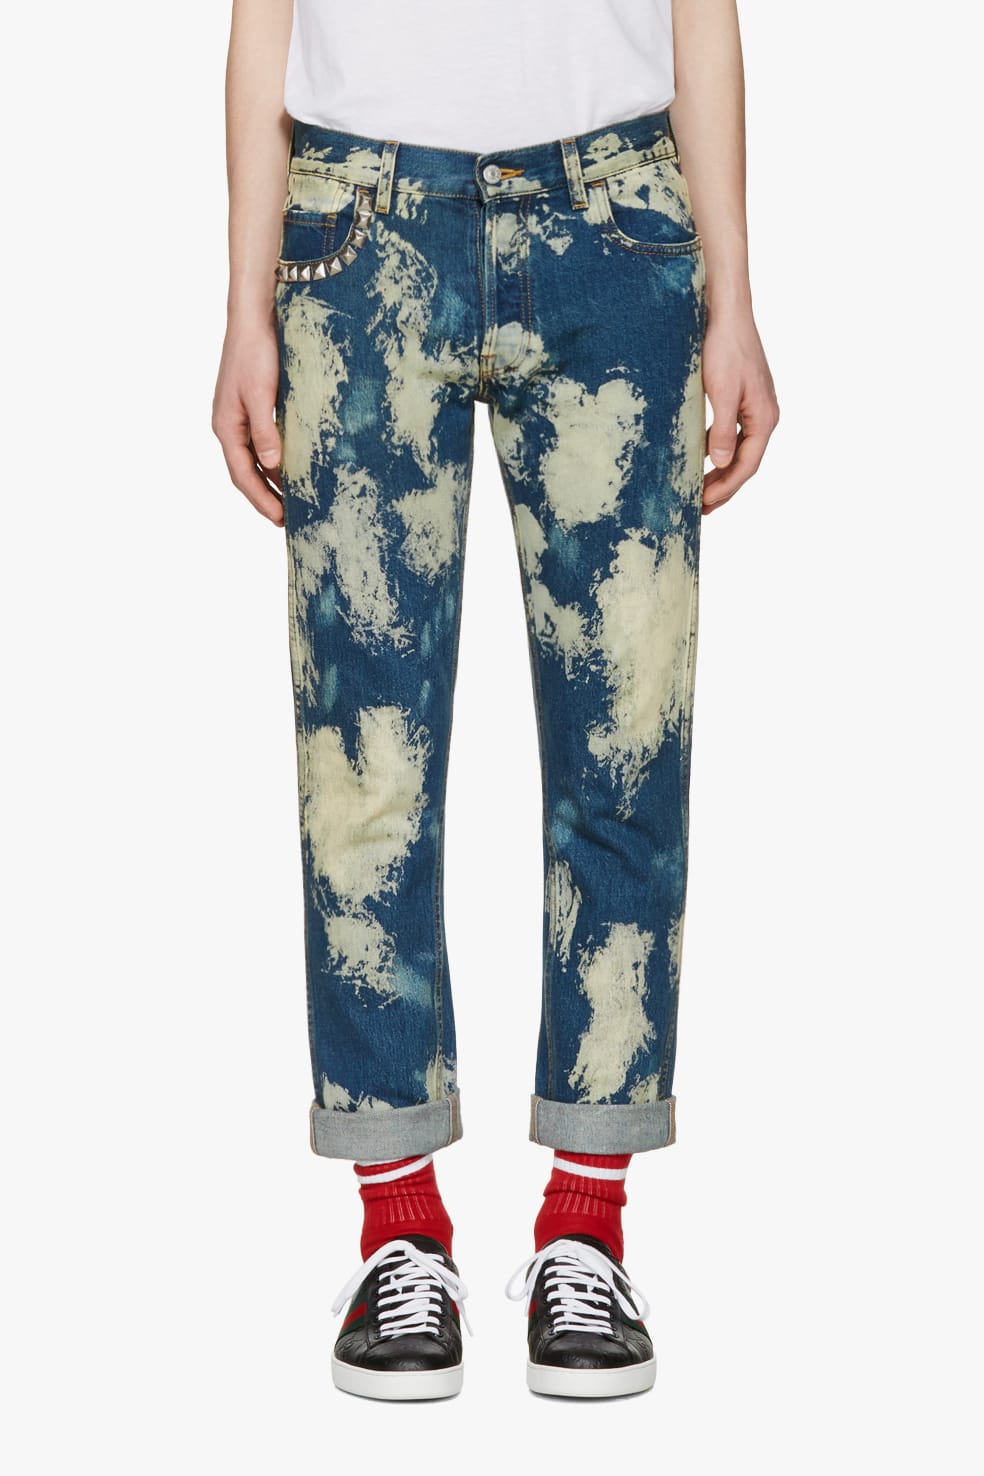 Bleached Punk-Inspired Denim Jeans 